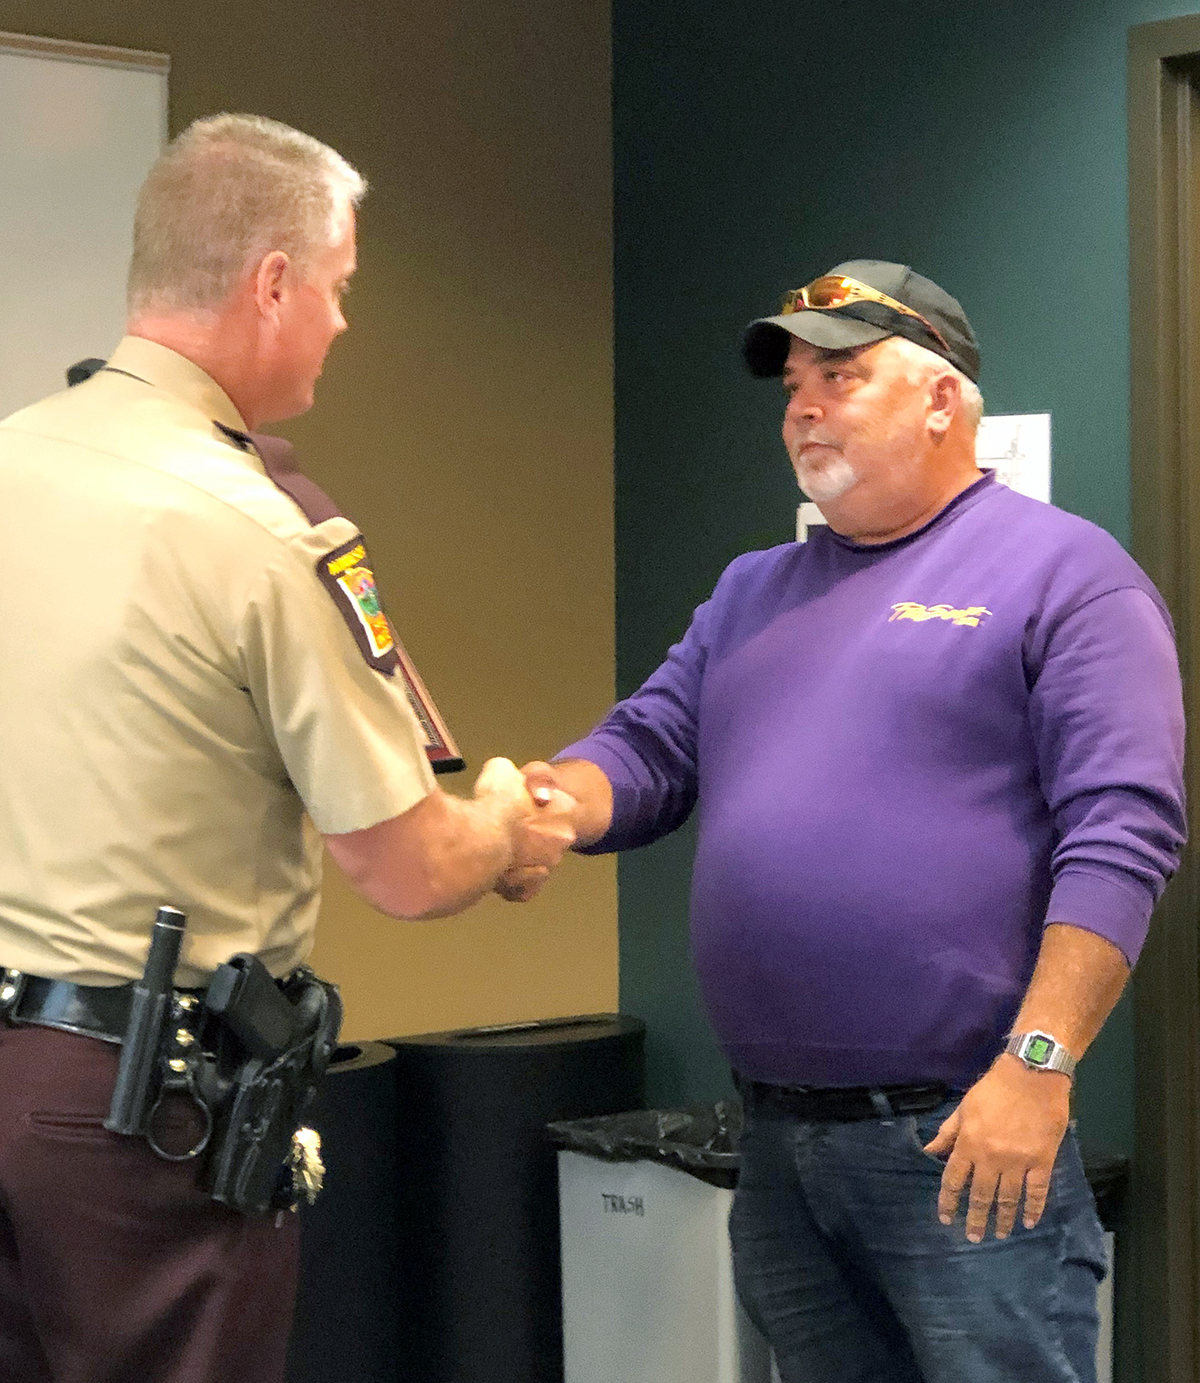 A state trooper and a man in a purple shirt shaking hands